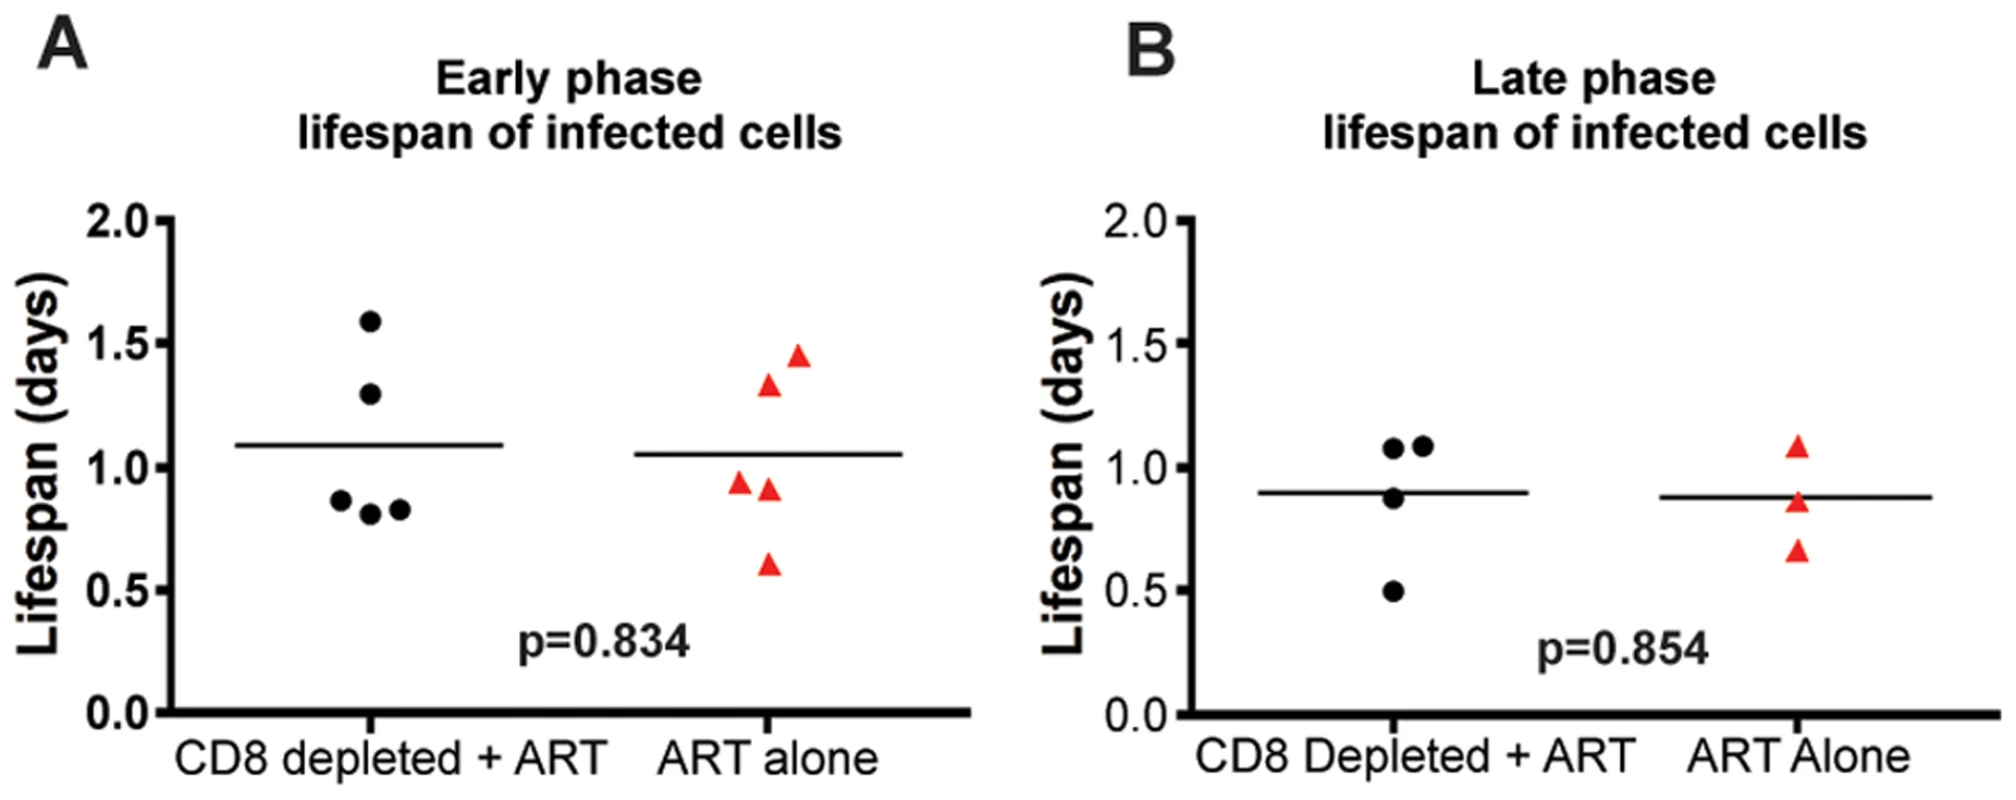 CD8+ lymphocyte depletion does not affect the lifespan of infected cells during SIV infection.